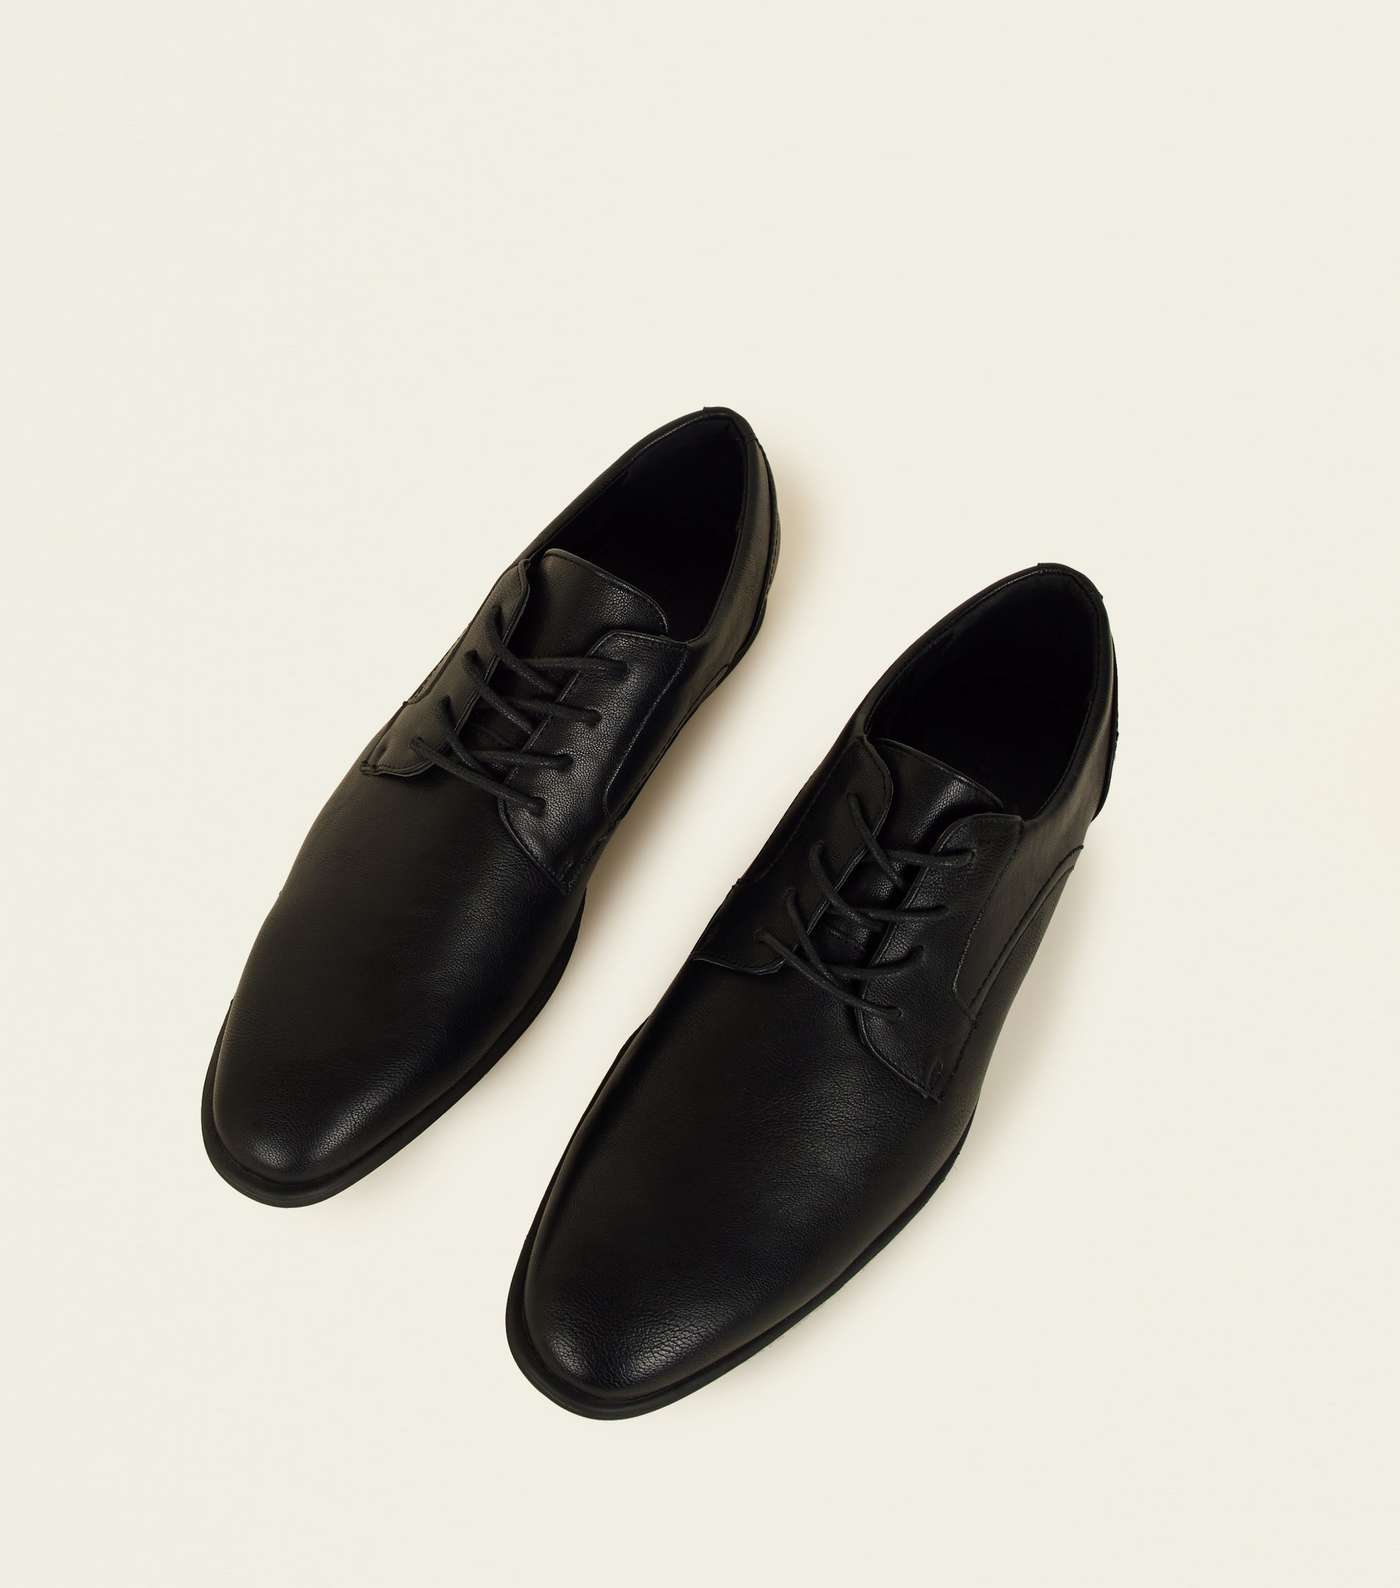 Black Leather-Look Formal Shoes Image 3